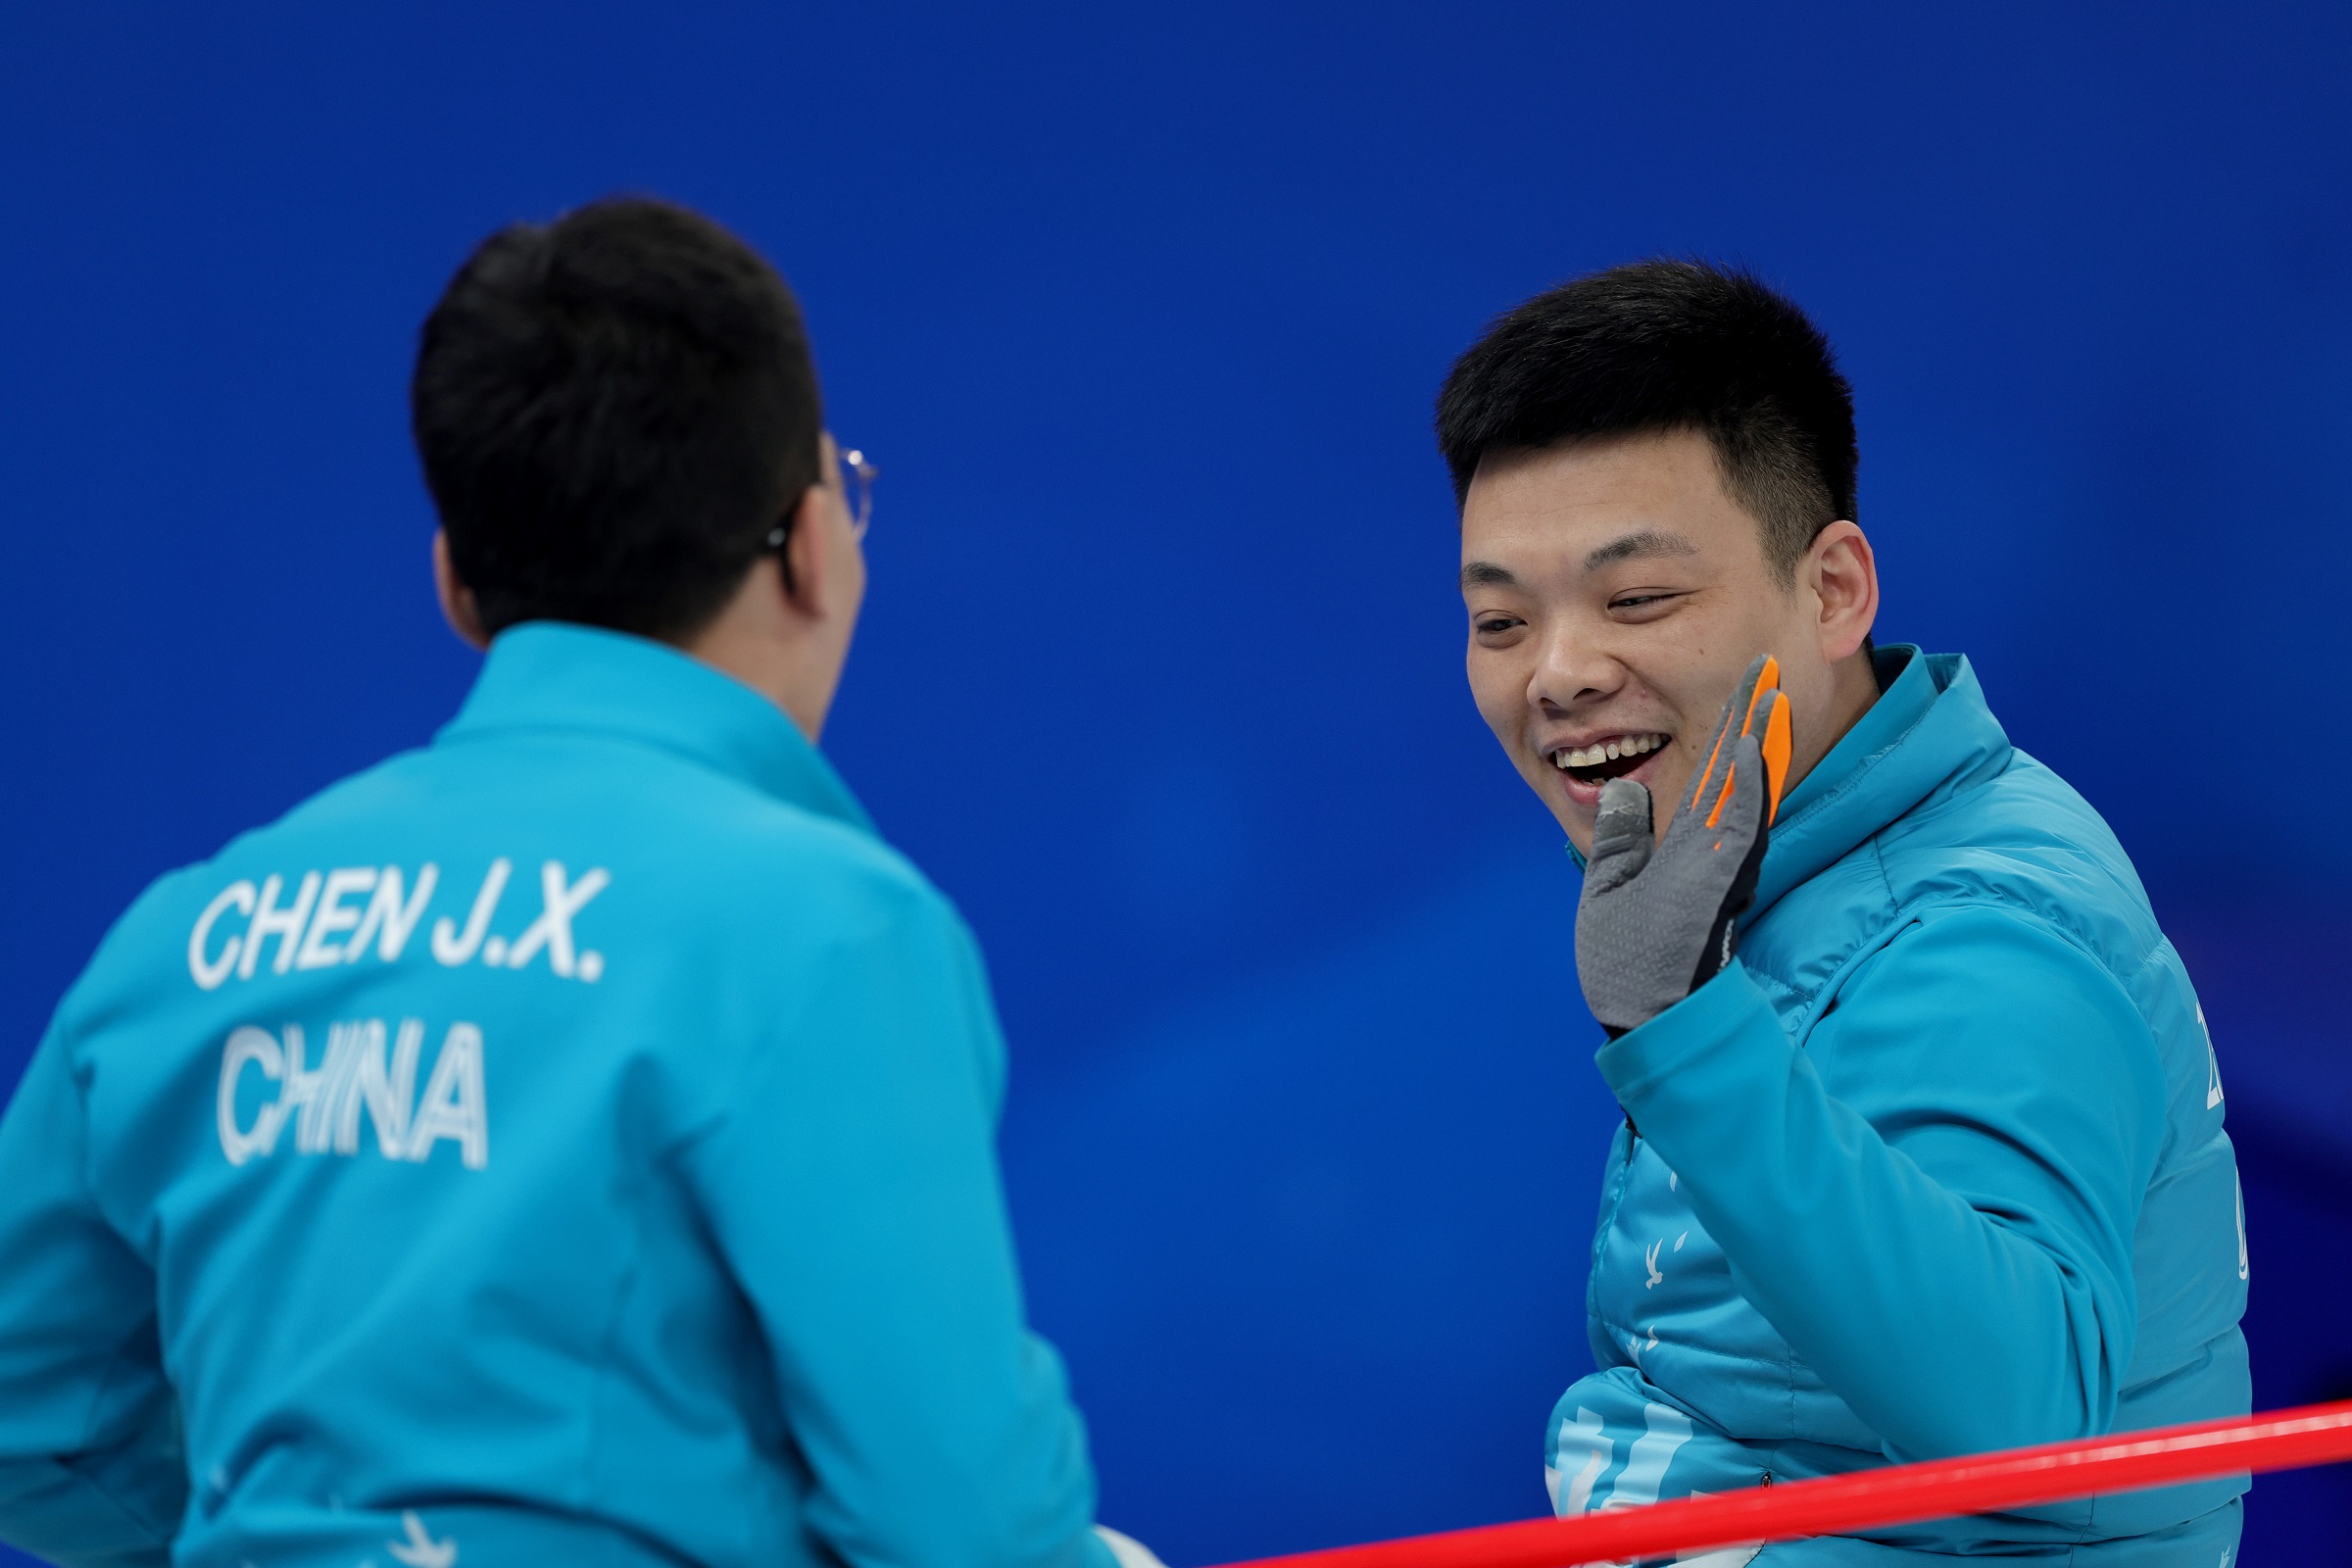 Chinese Wheelchair Curling team members celebrate during one of their Beijing 2022 matches